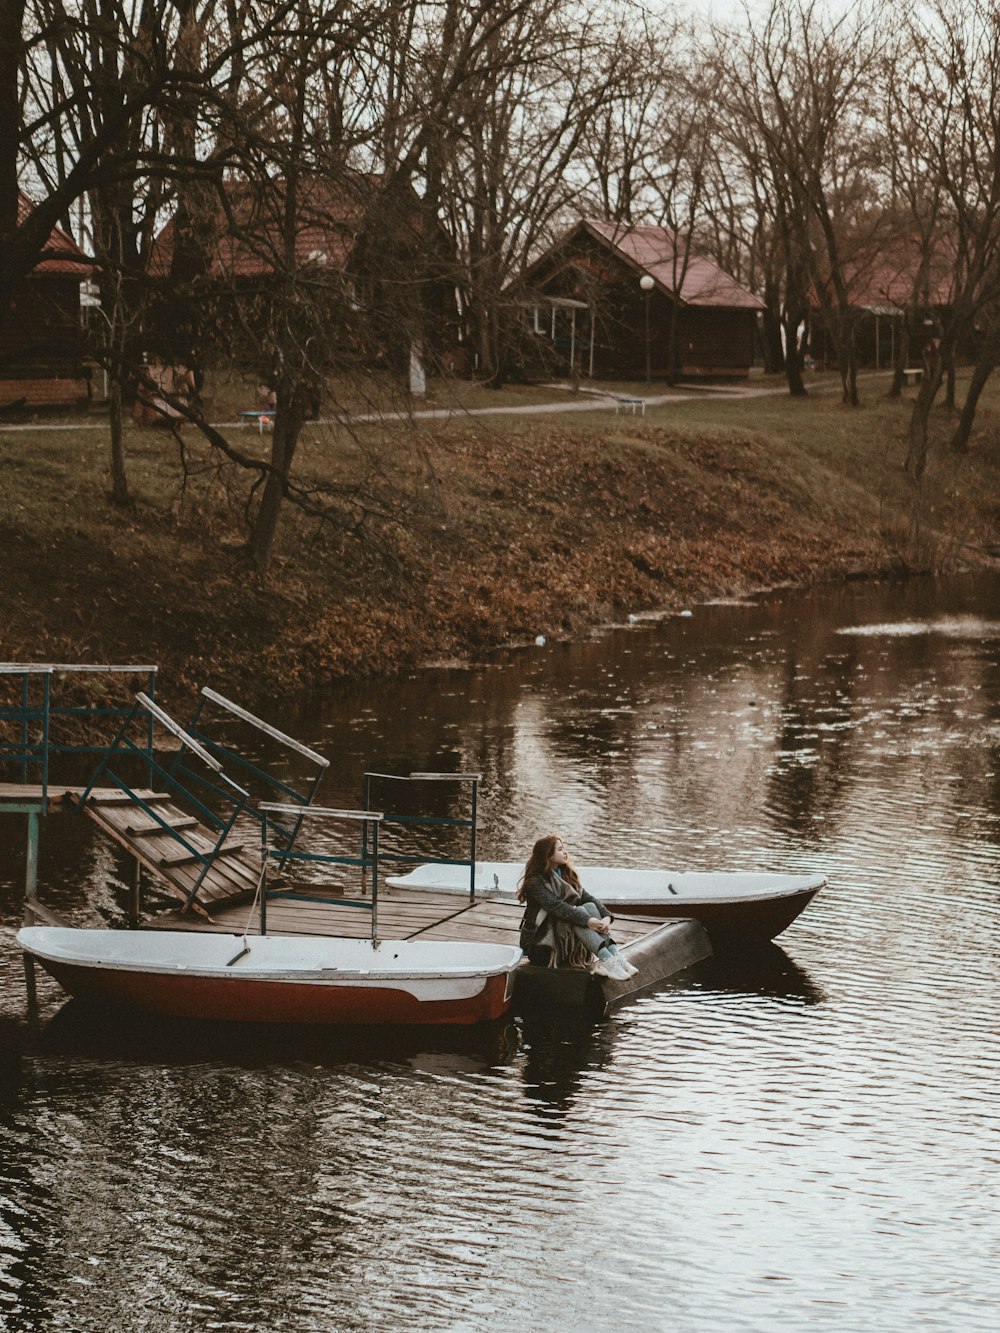 a person sitting on a boat in a body of water